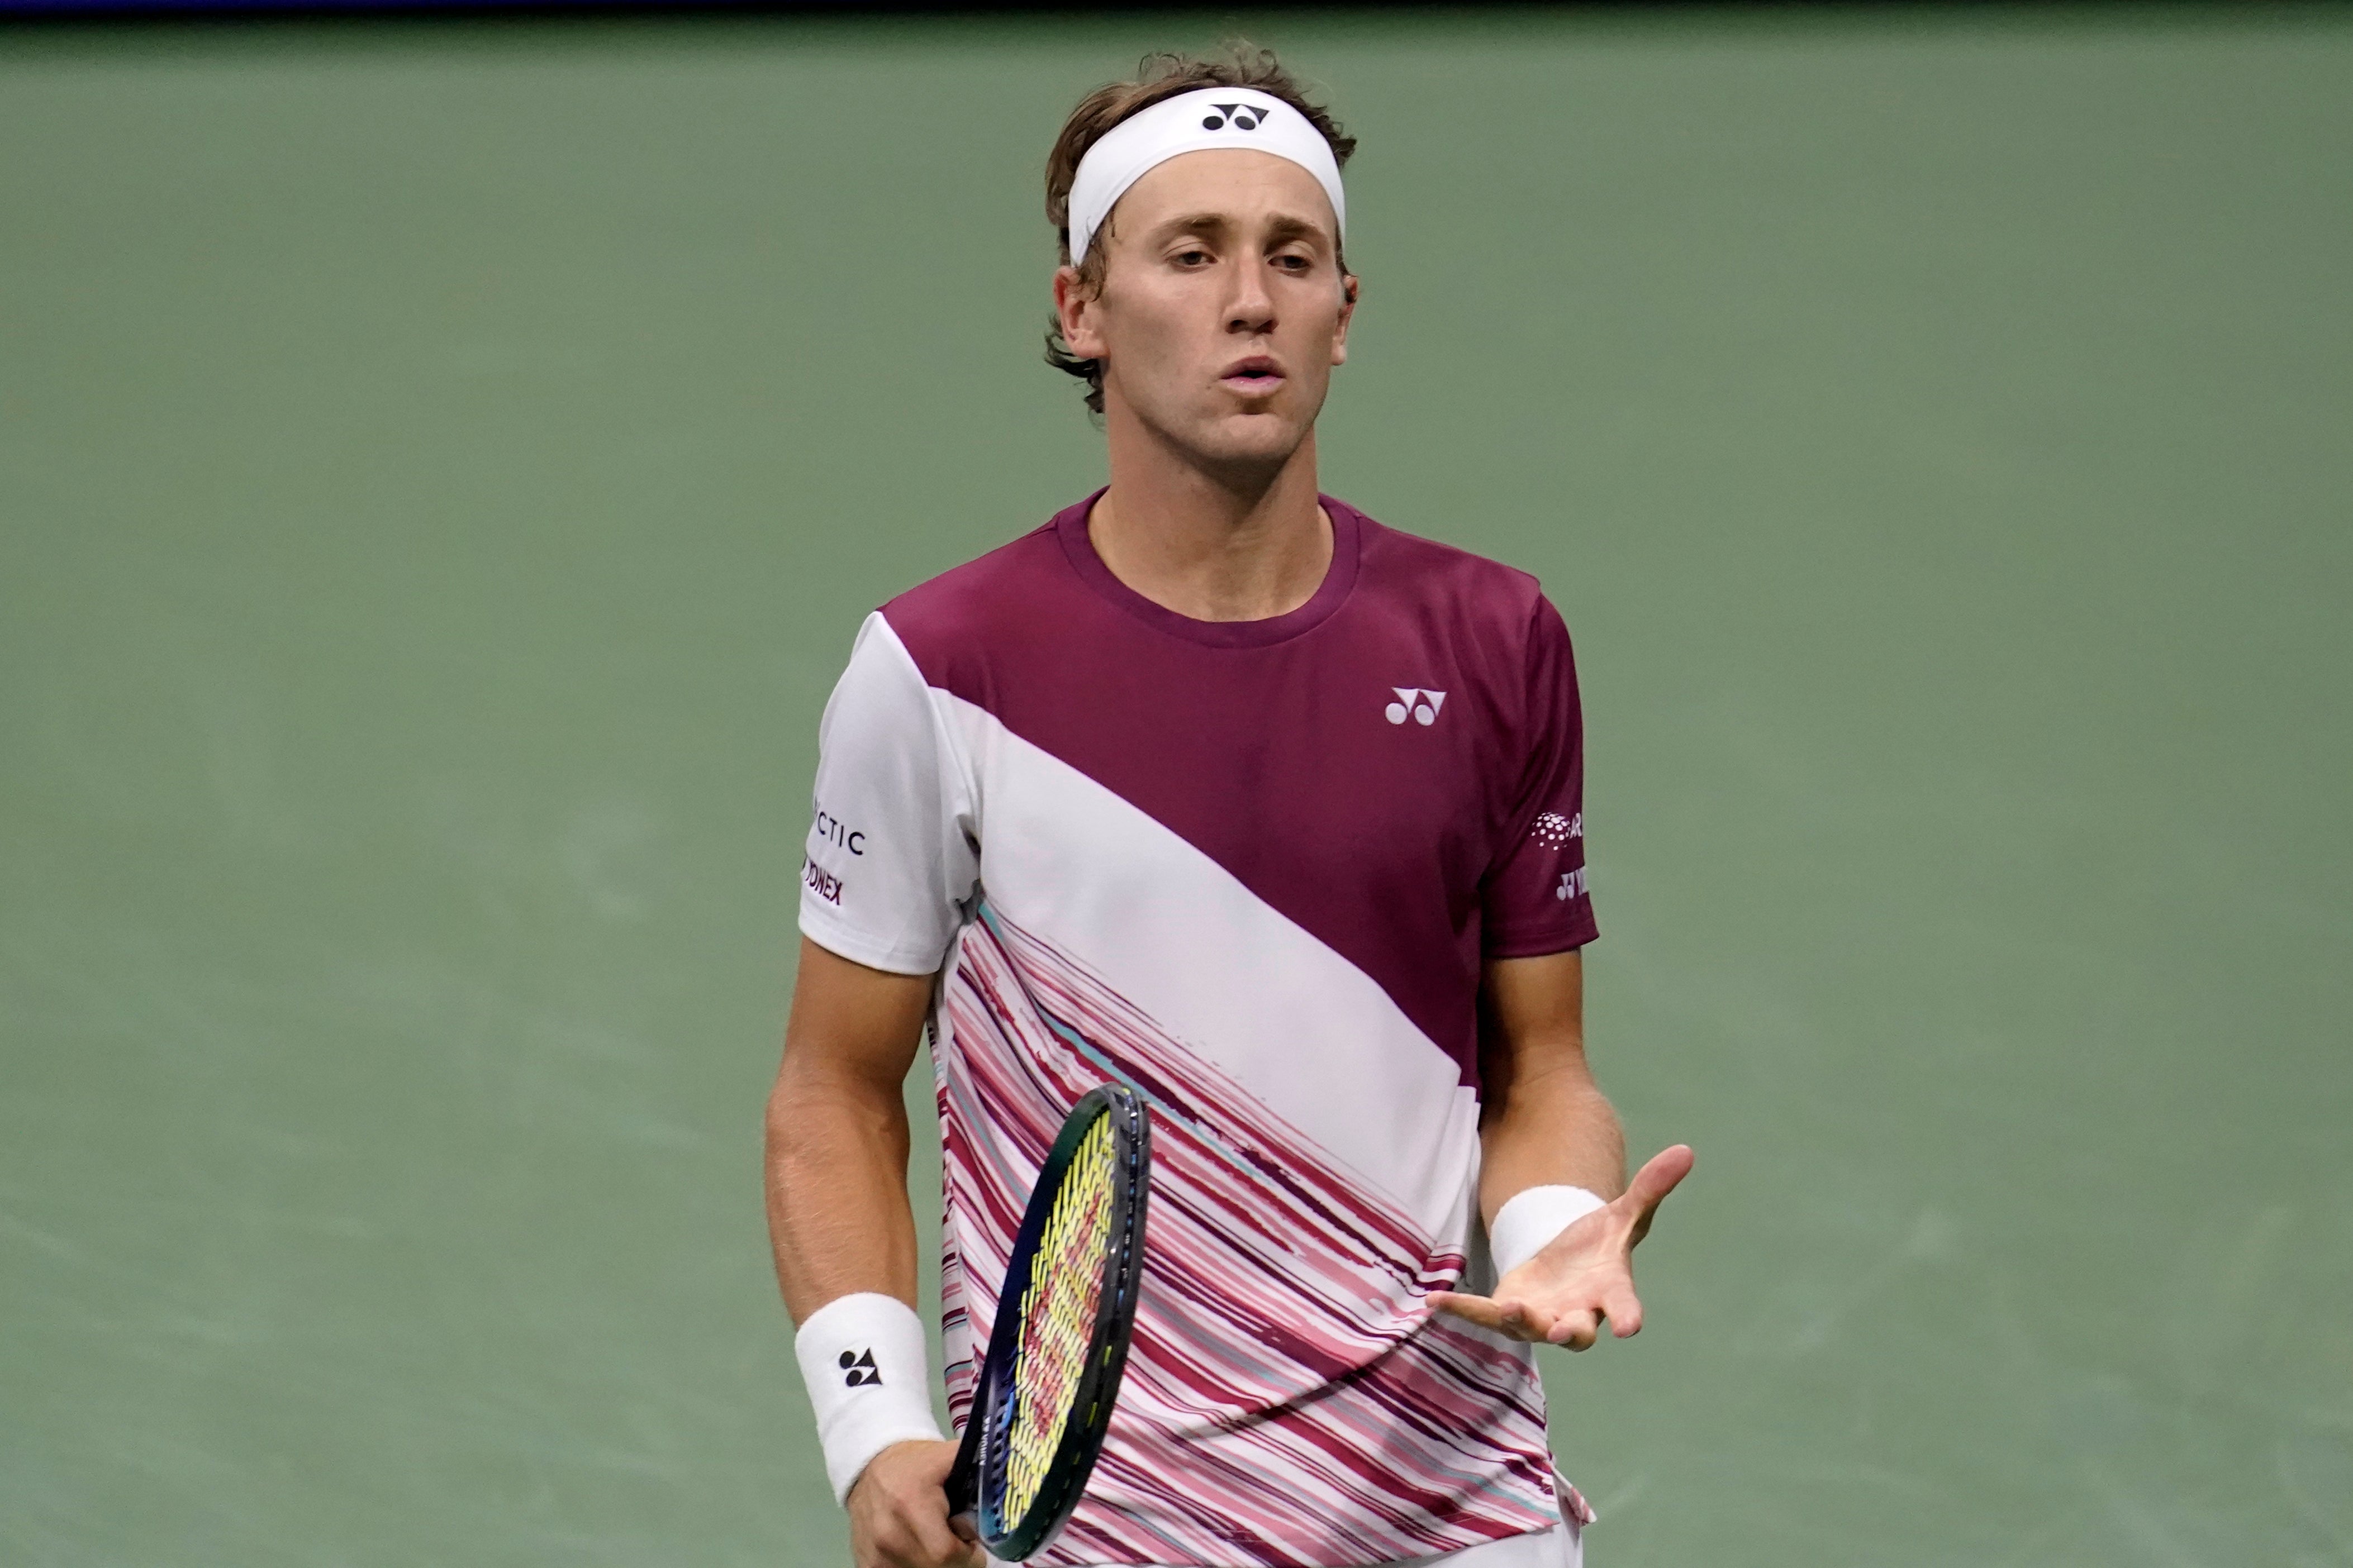 Casper Ruud looked frustrated during the match (Mary Altaffer/AP)